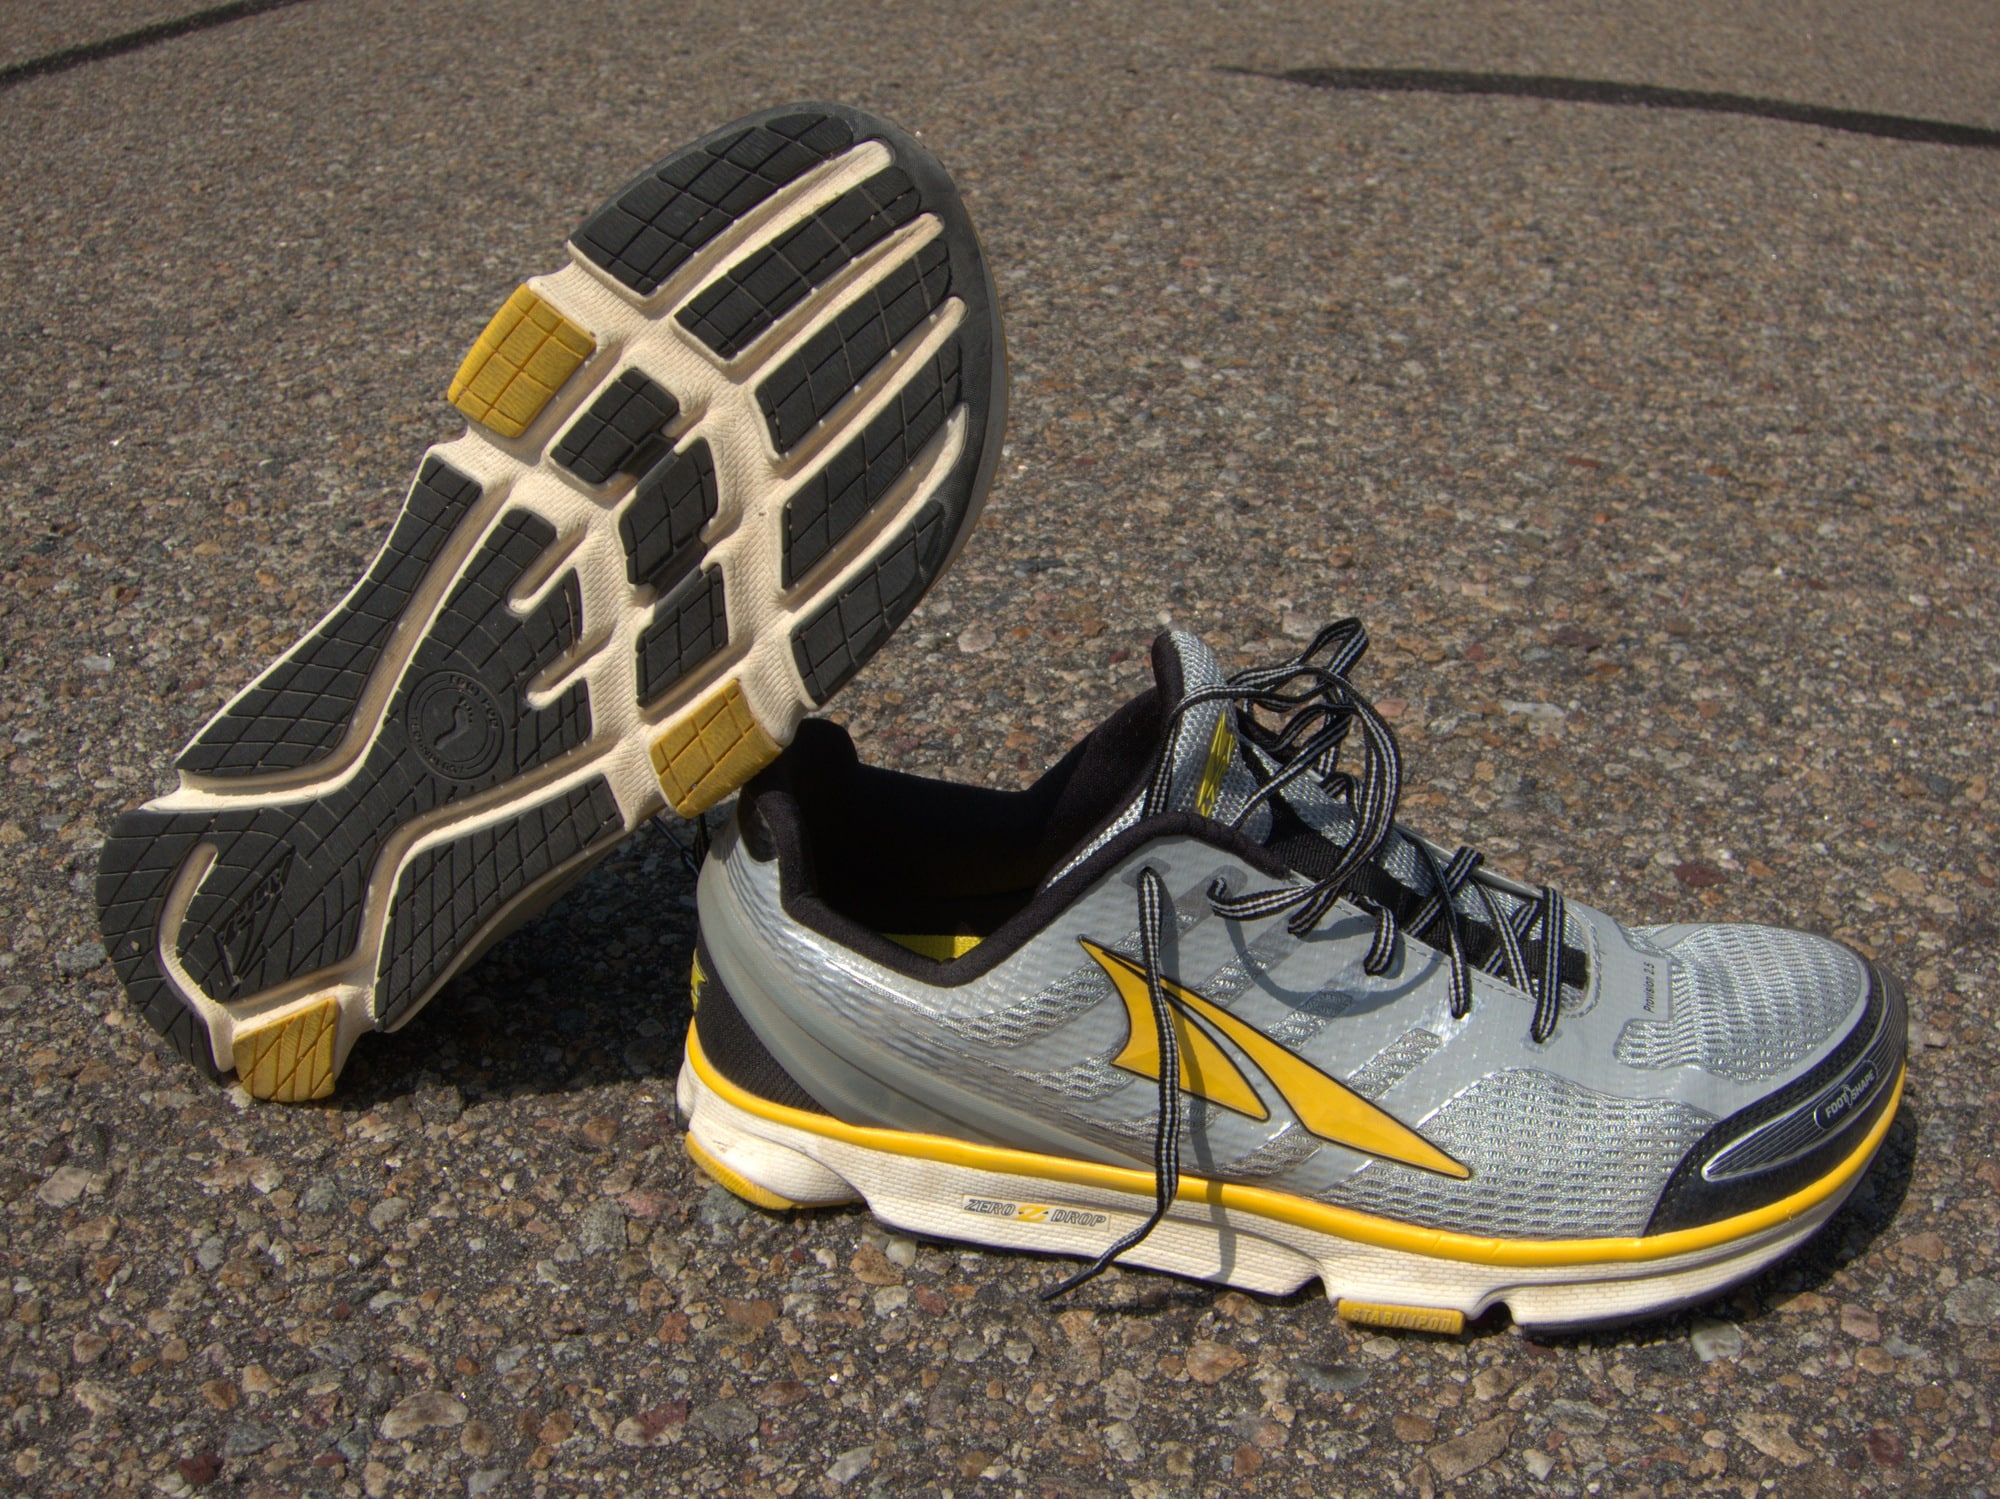 Review: Altra Provision 2.5 || An easy 